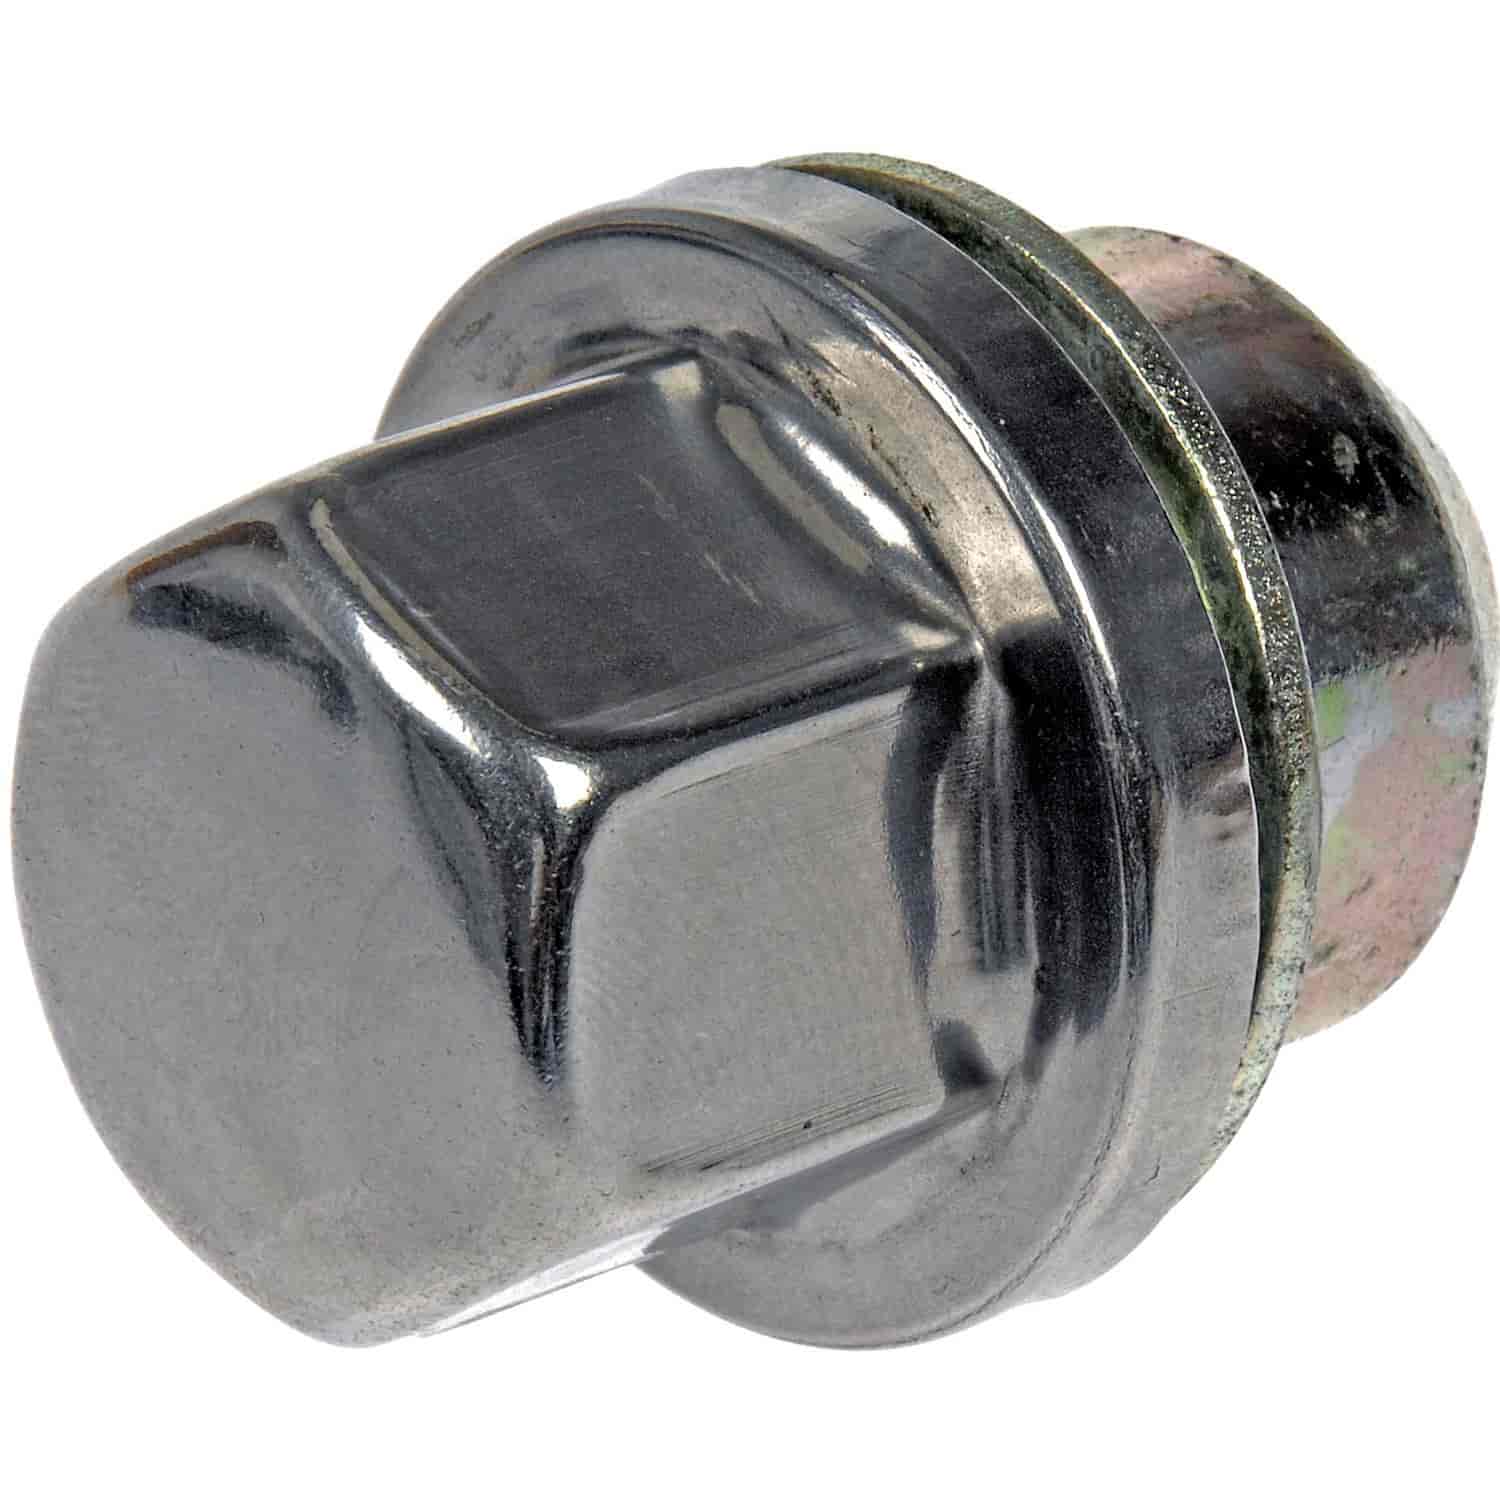 M14-1.50 Flattop Capped Nut - 27mm Hex 50mm Length